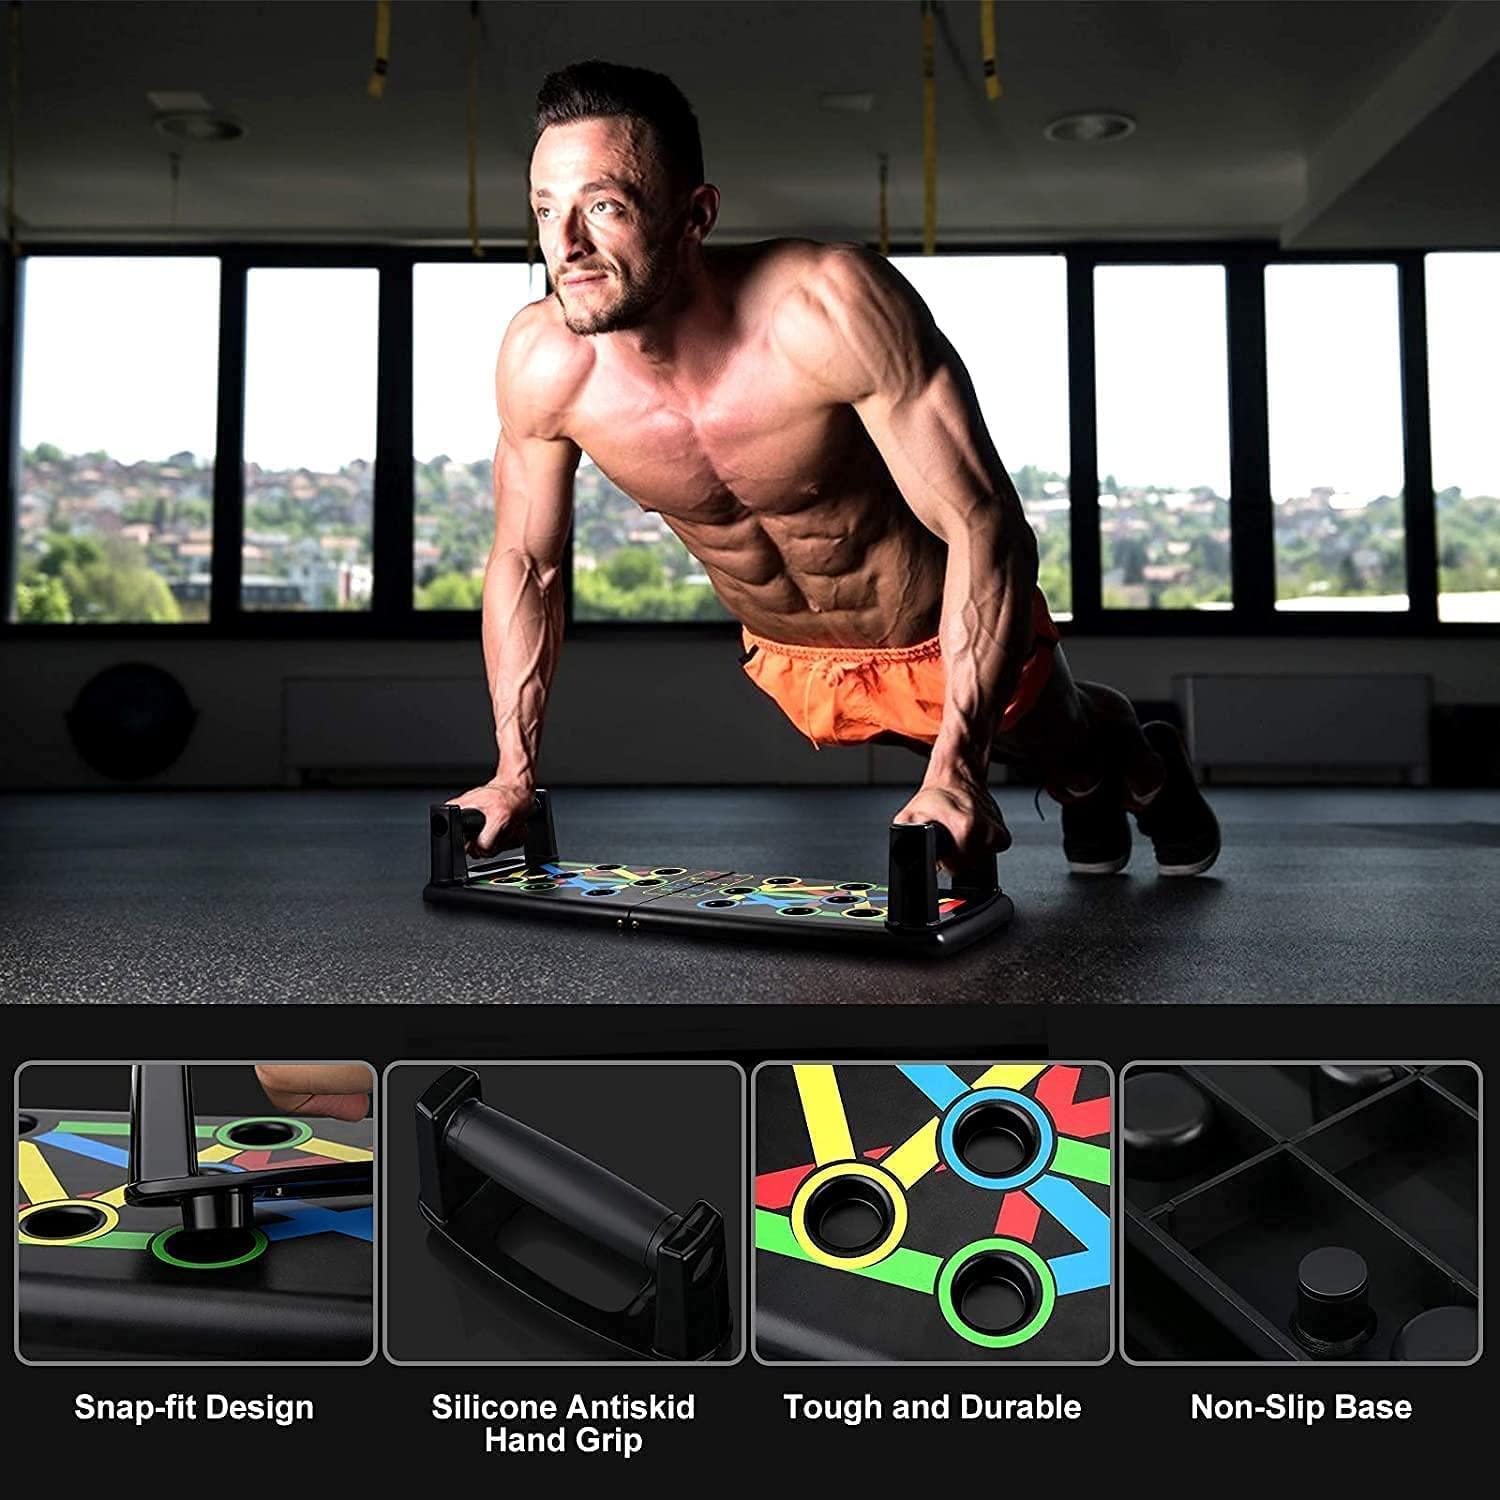 Wellberg Portable Push Up Board | Body Building Exercise Tools | Chest Triceps | 14 in 1 Multi-Function Pushup Bracket Rack Dips Stand Body | Push Up Equipment For Men Women - WELLBERG